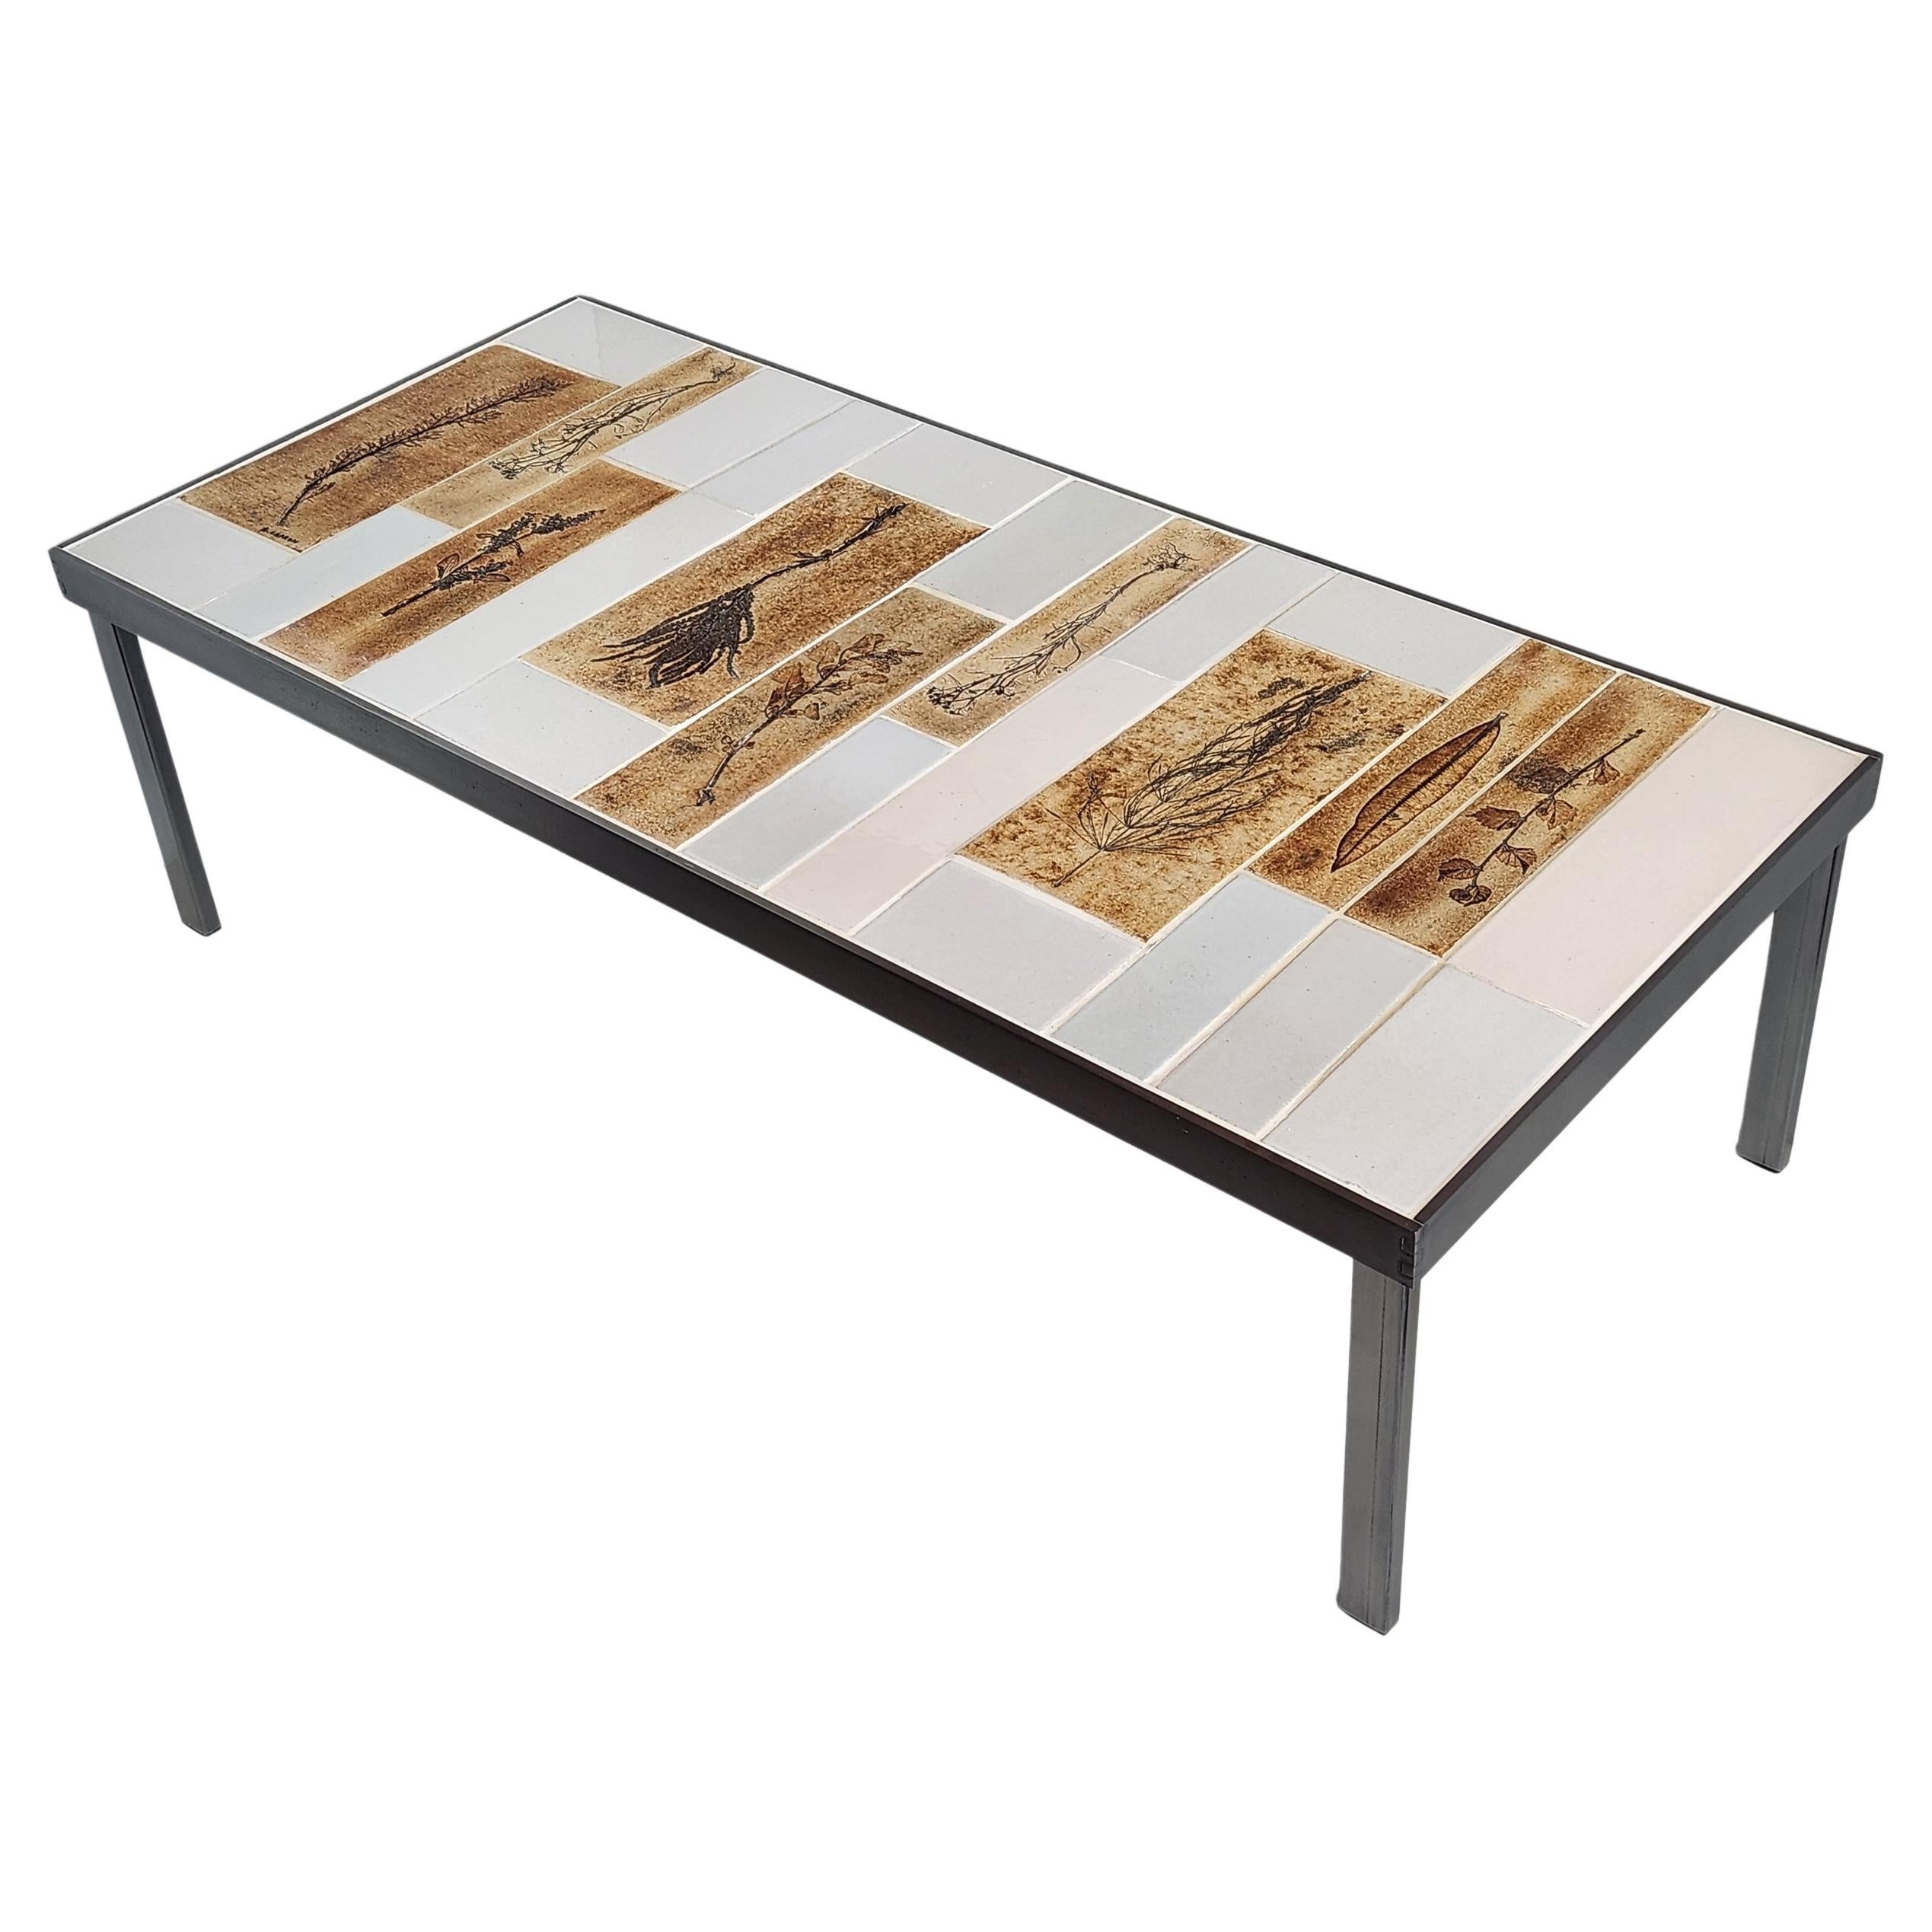 Roger Capron - Coffee Table, Garrigue/White Ceramic Tiles, Dovetail Metal Frame For Sale